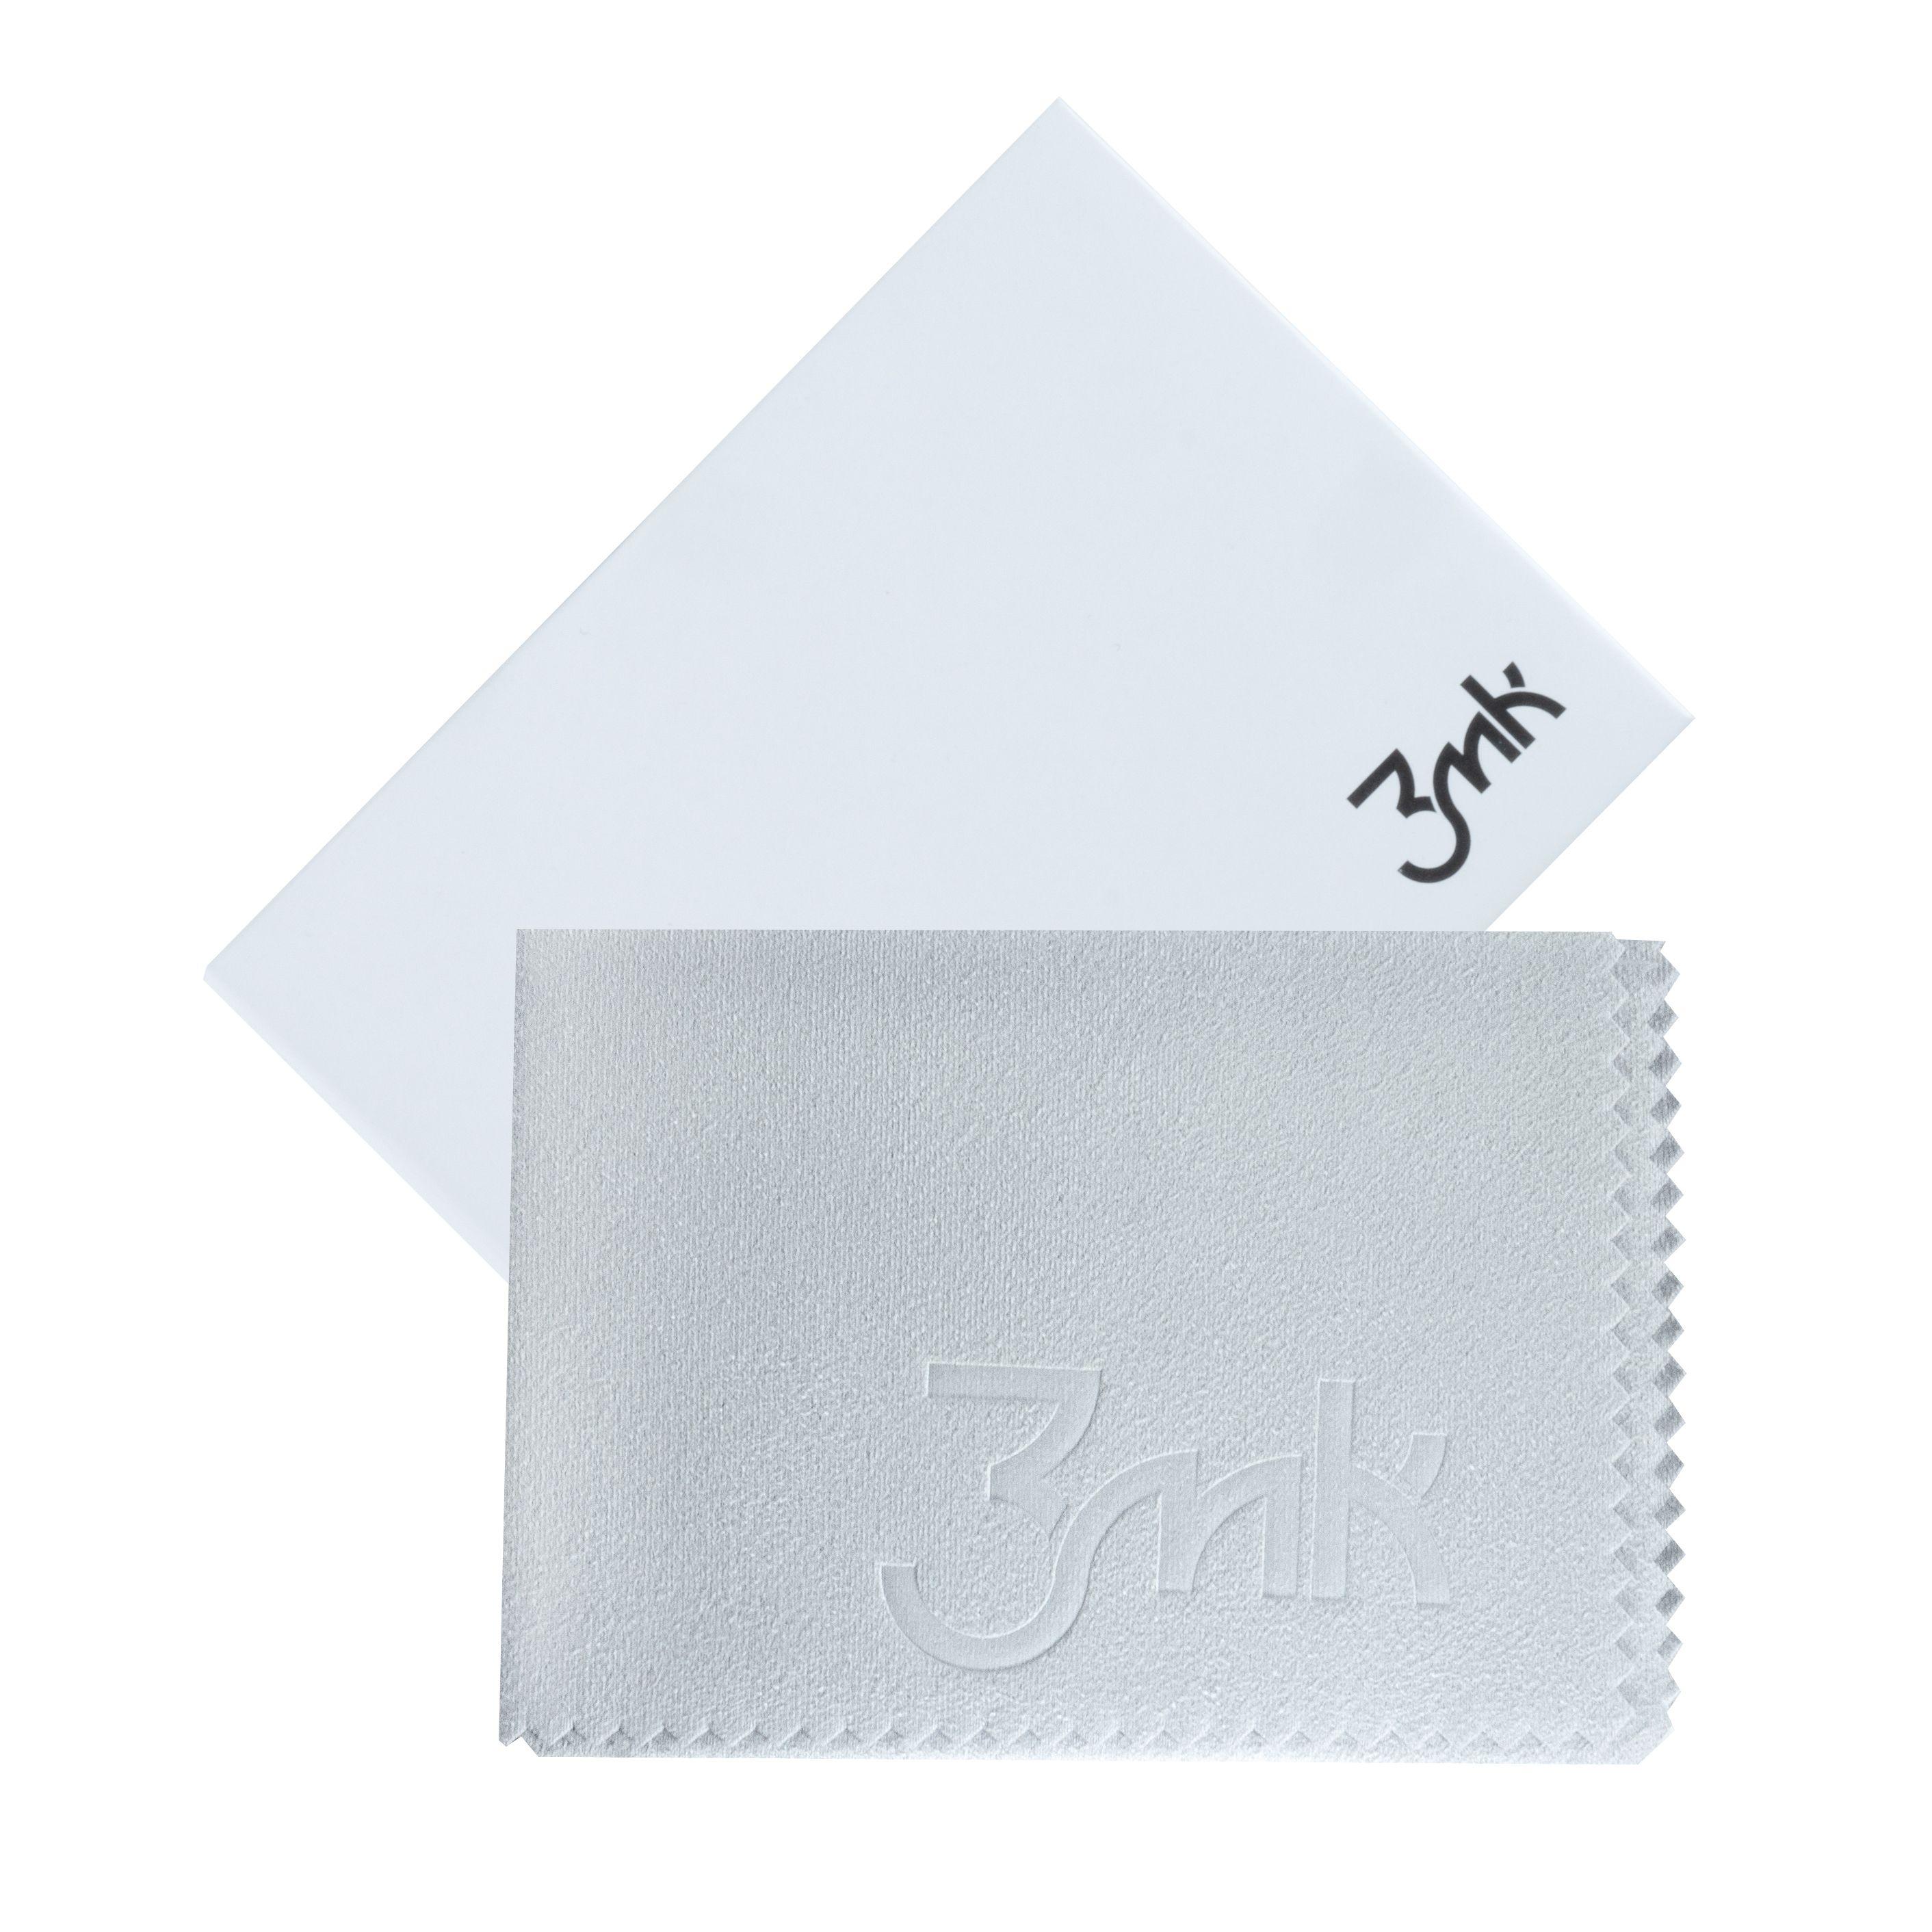 3mk all-safe sell - Cleaning Cloth